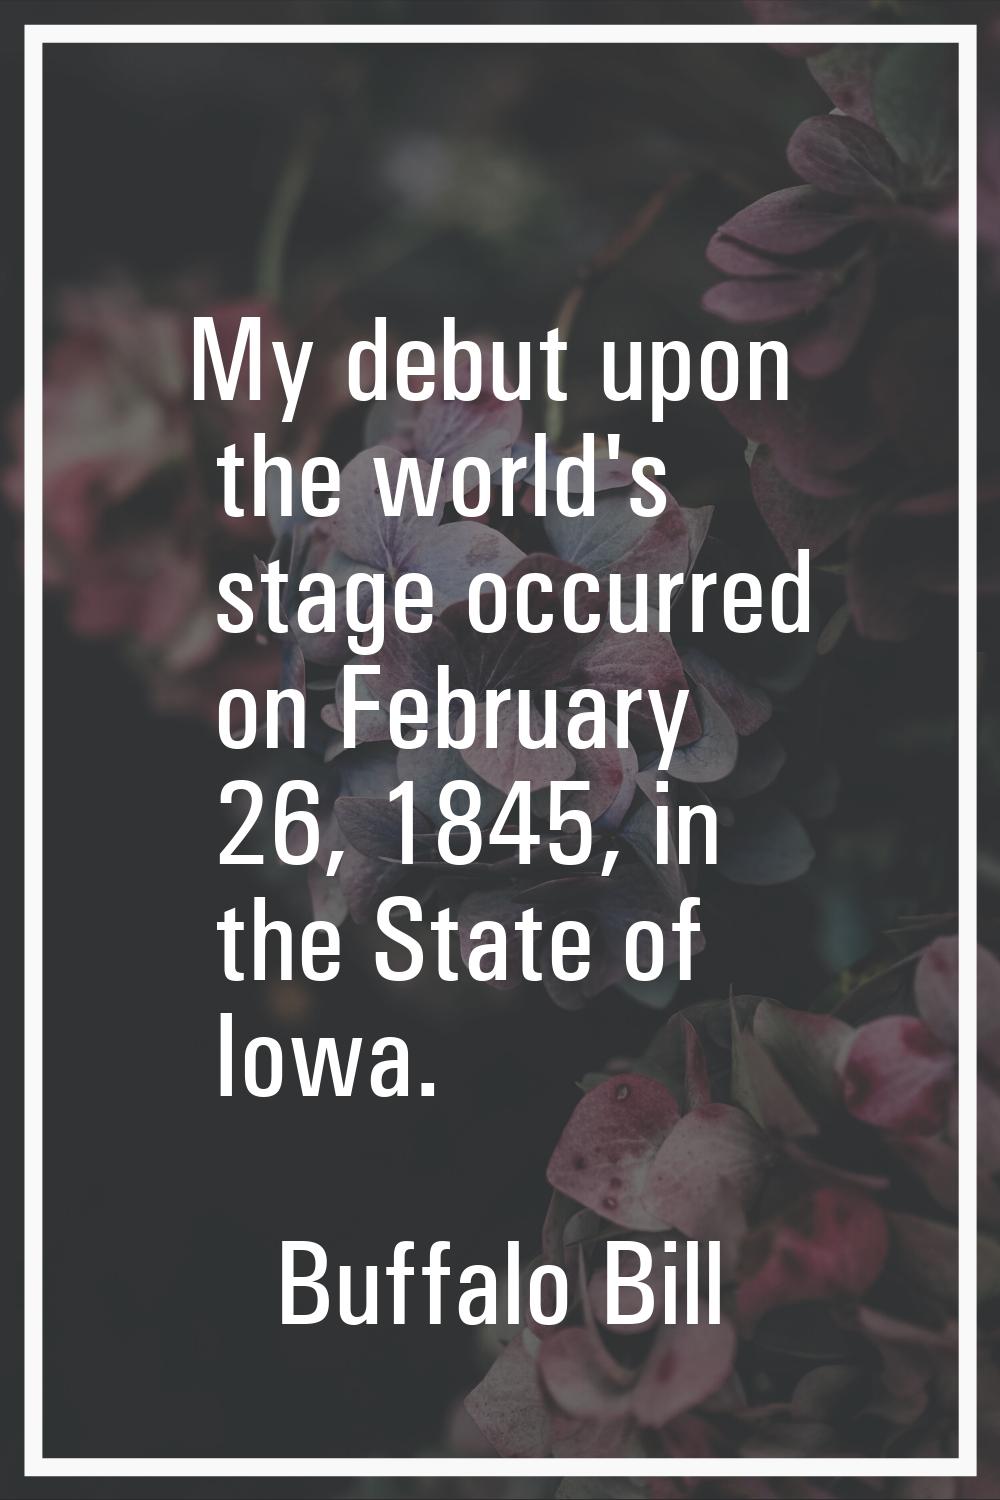 My debut upon the world's stage occurred on February 26, 1845, in the State of Iowa.